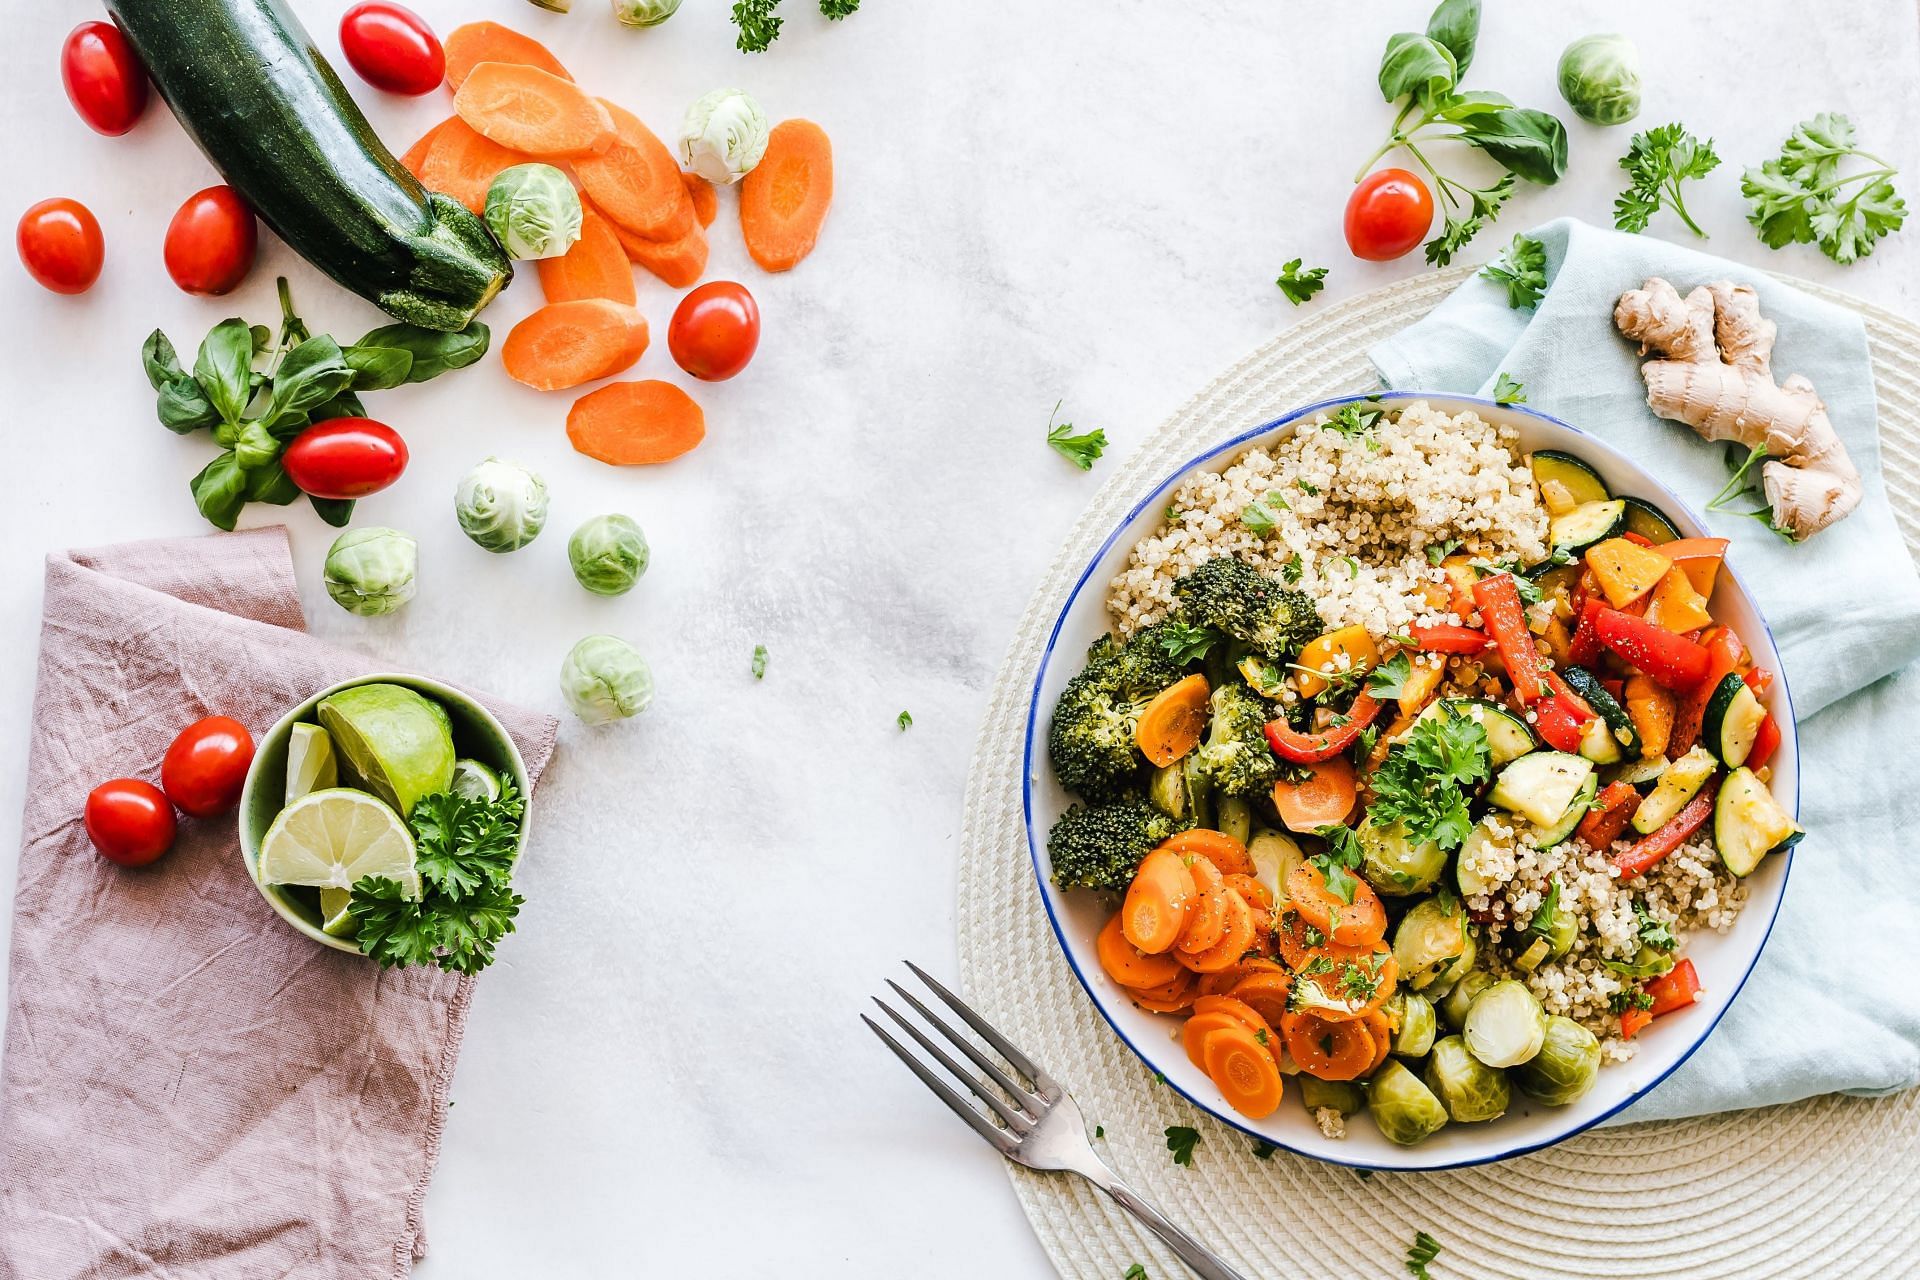 Importance of eating vegetables to burn belly fat (image sourced via Pexels / Photo by ella)